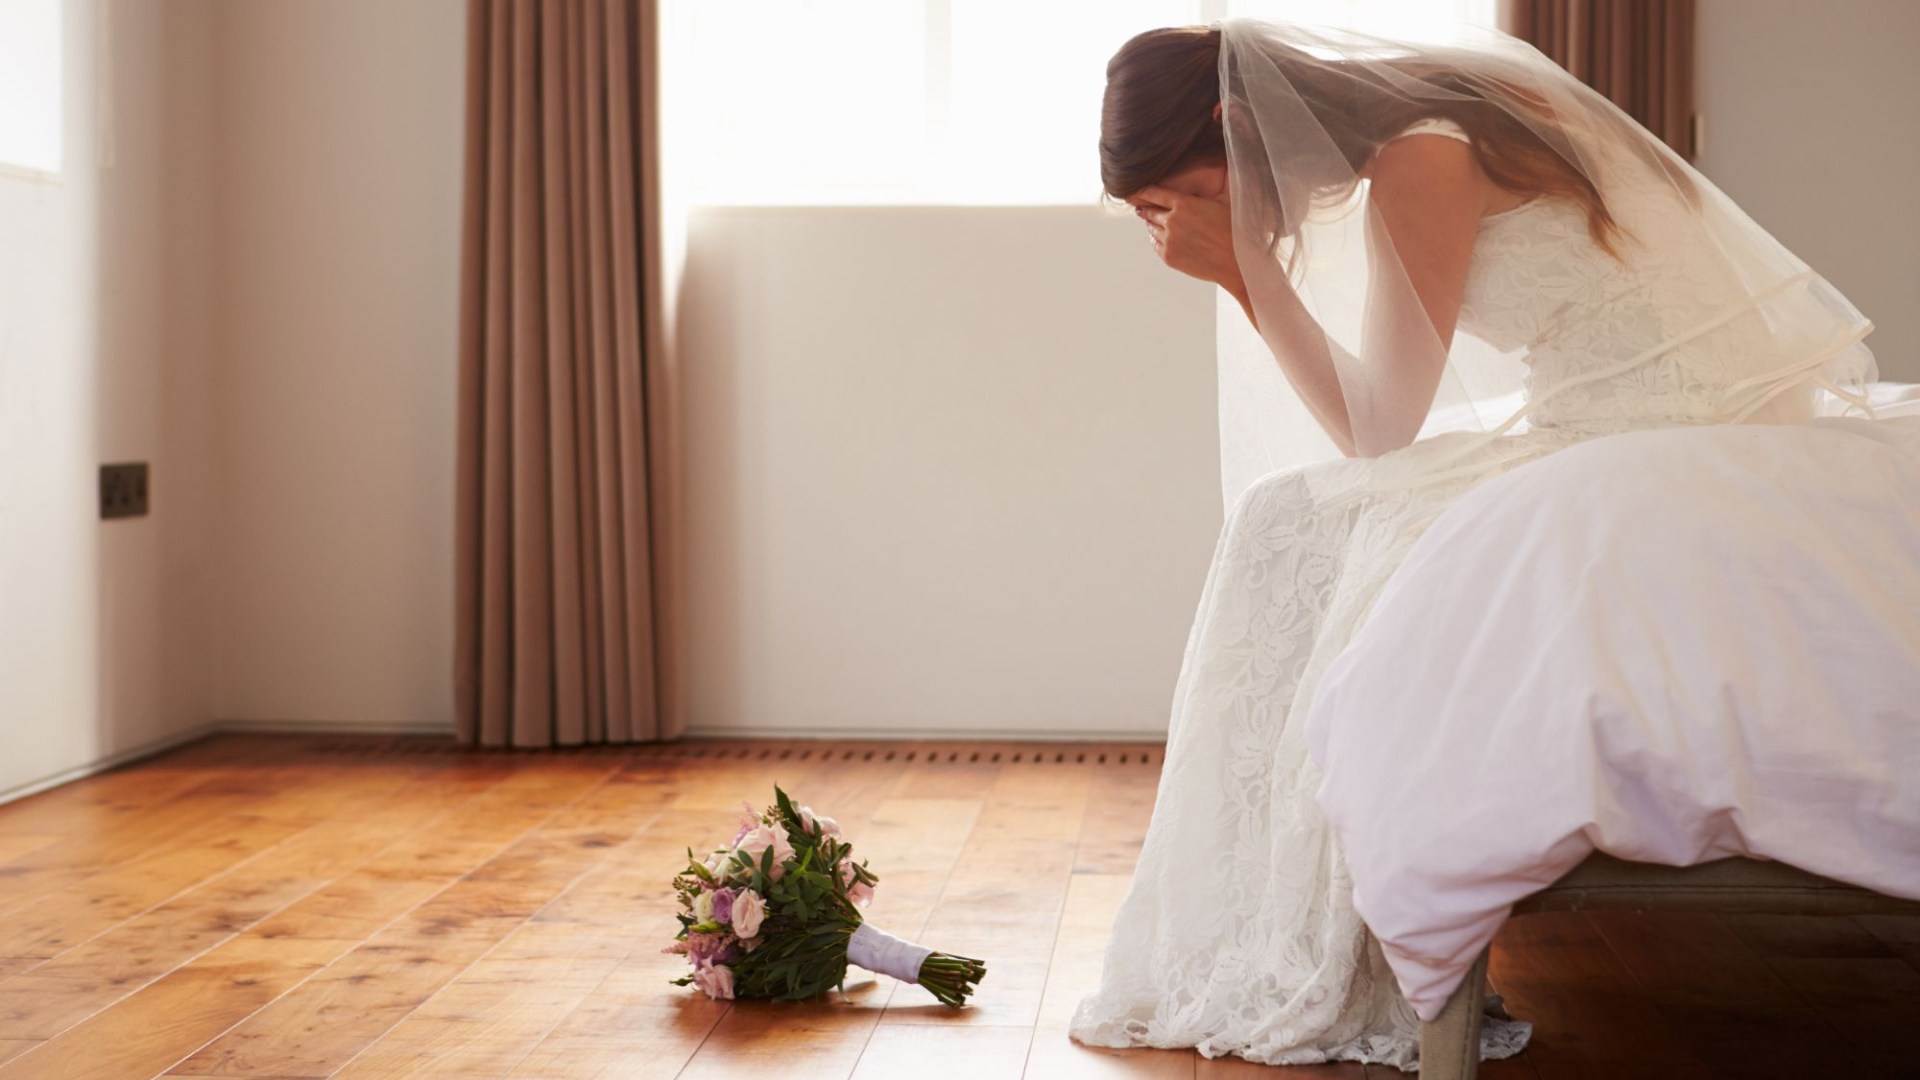 Unhappy Bride Contemplates Faking Wedding to Save Money and Sanity – Is It Worth It?